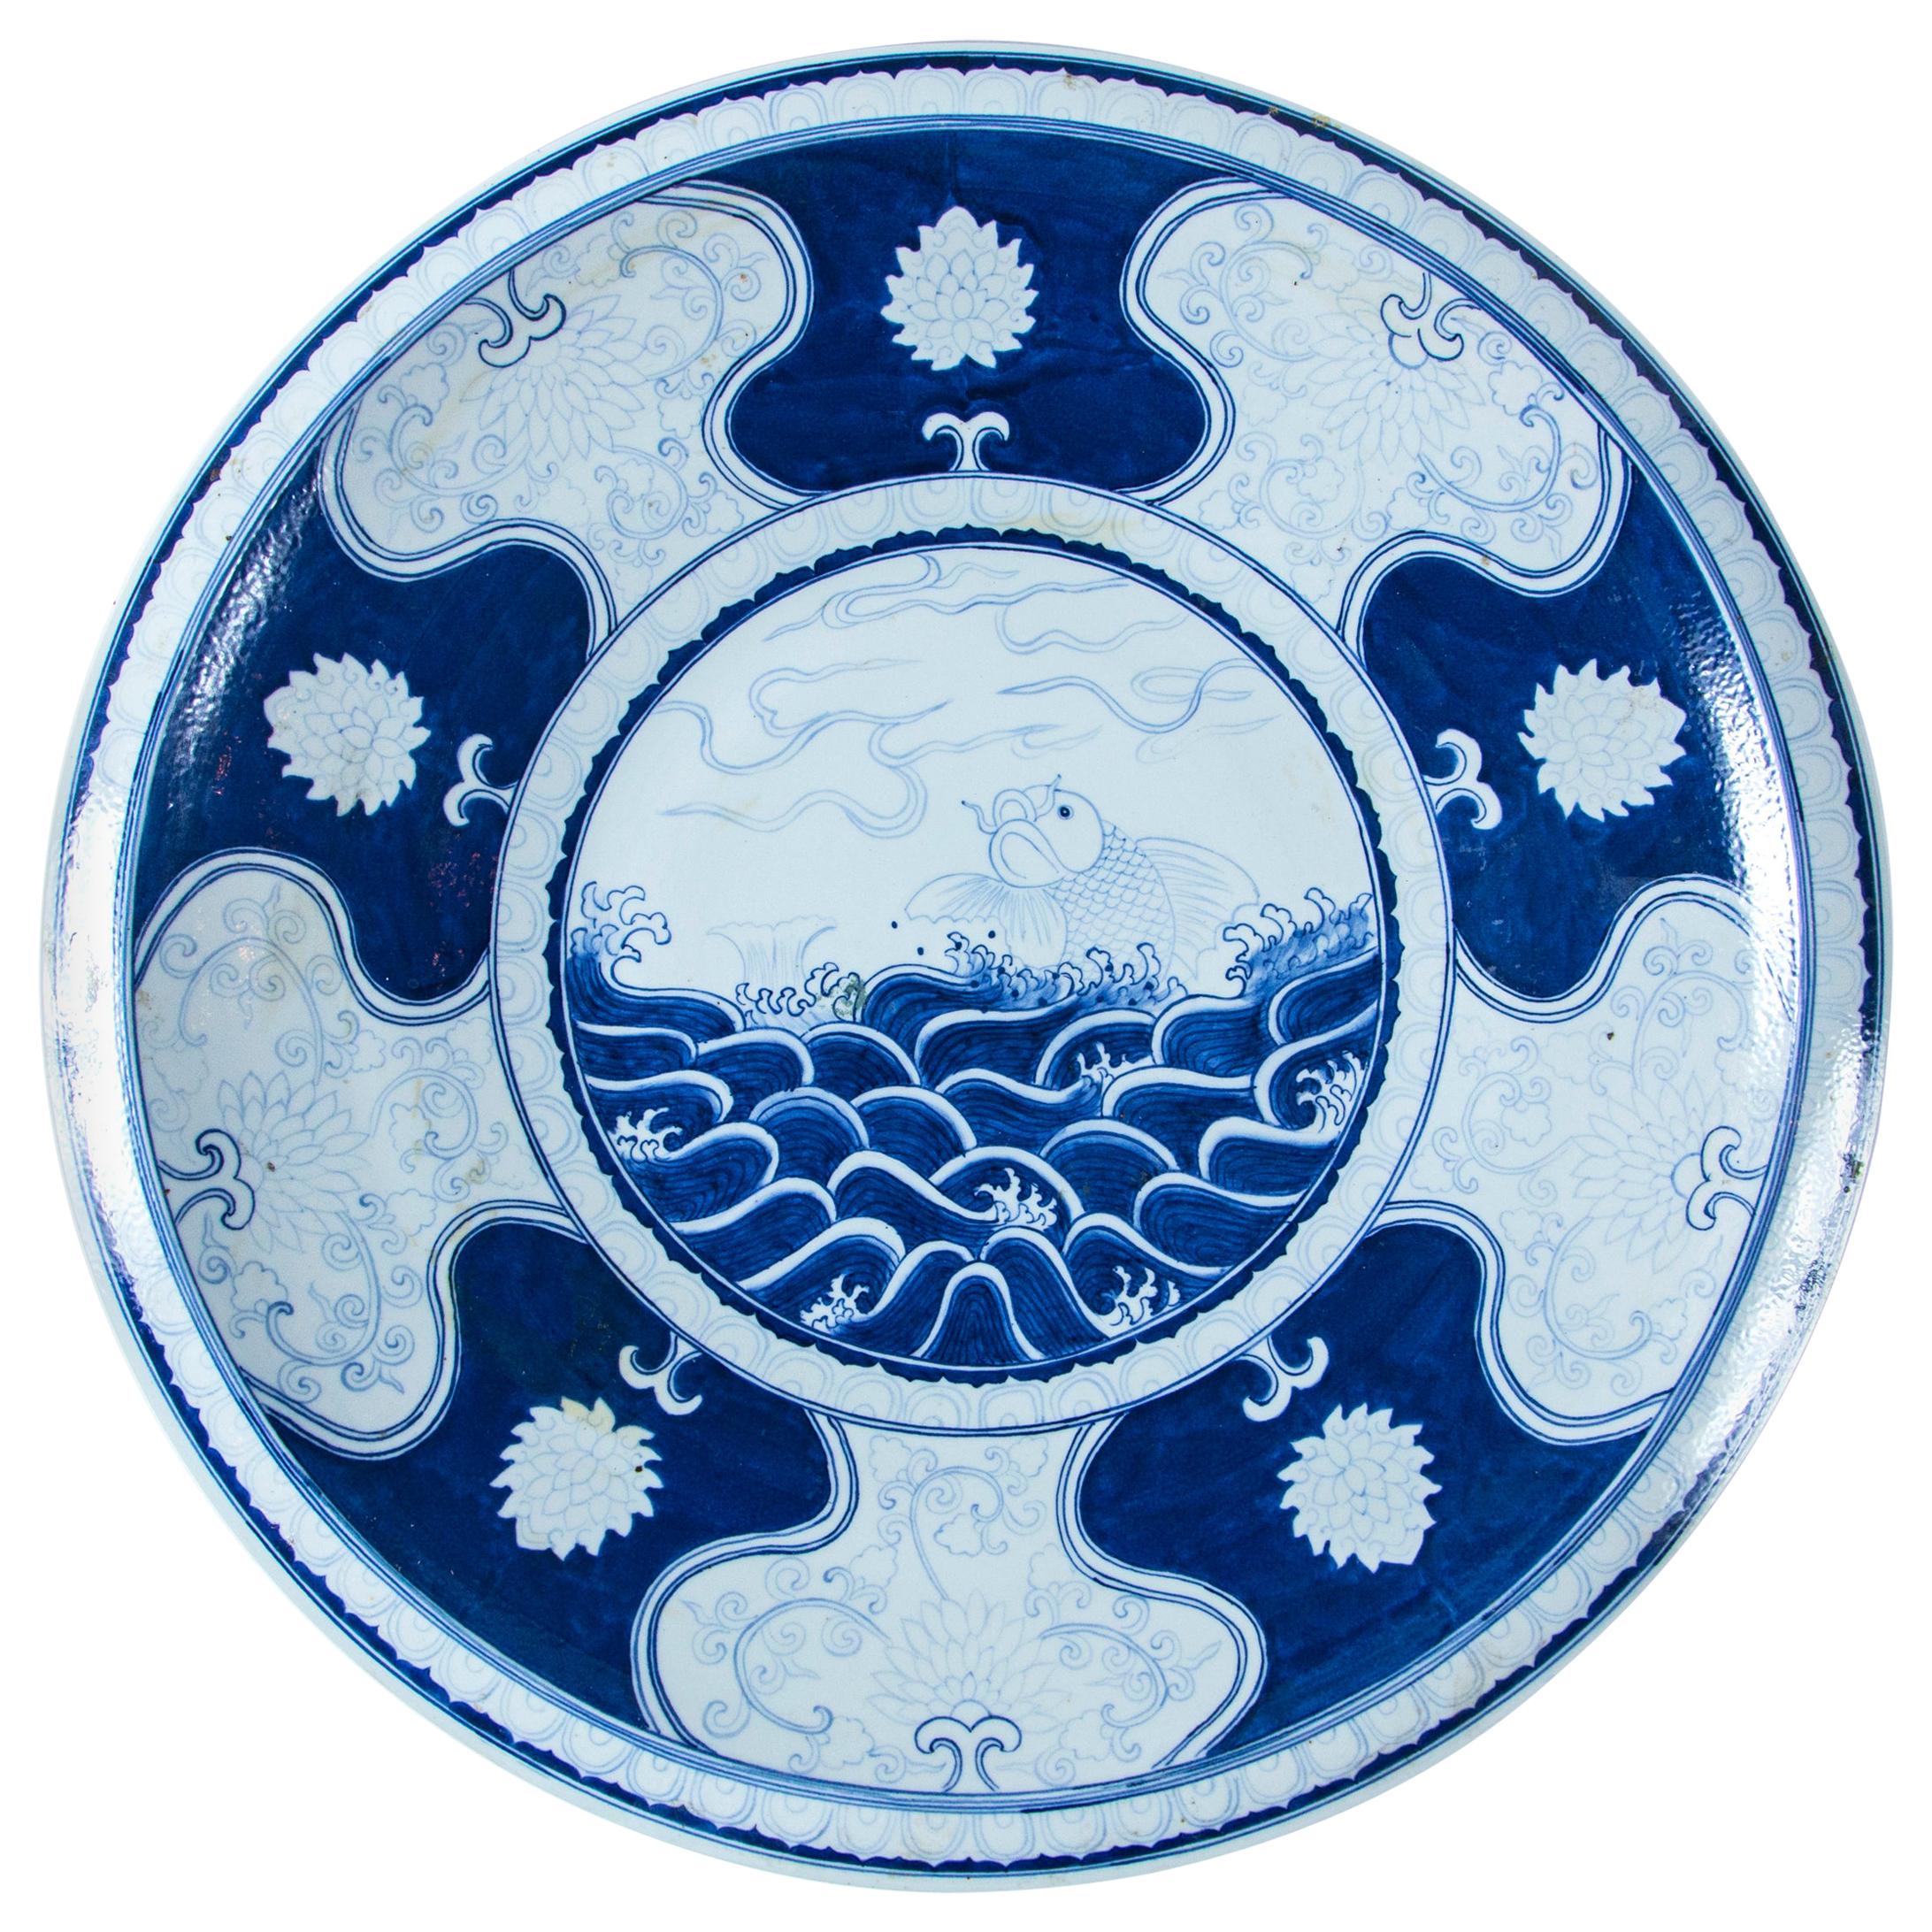 Japanese Porcelain Deep Plate or Charger For Sale